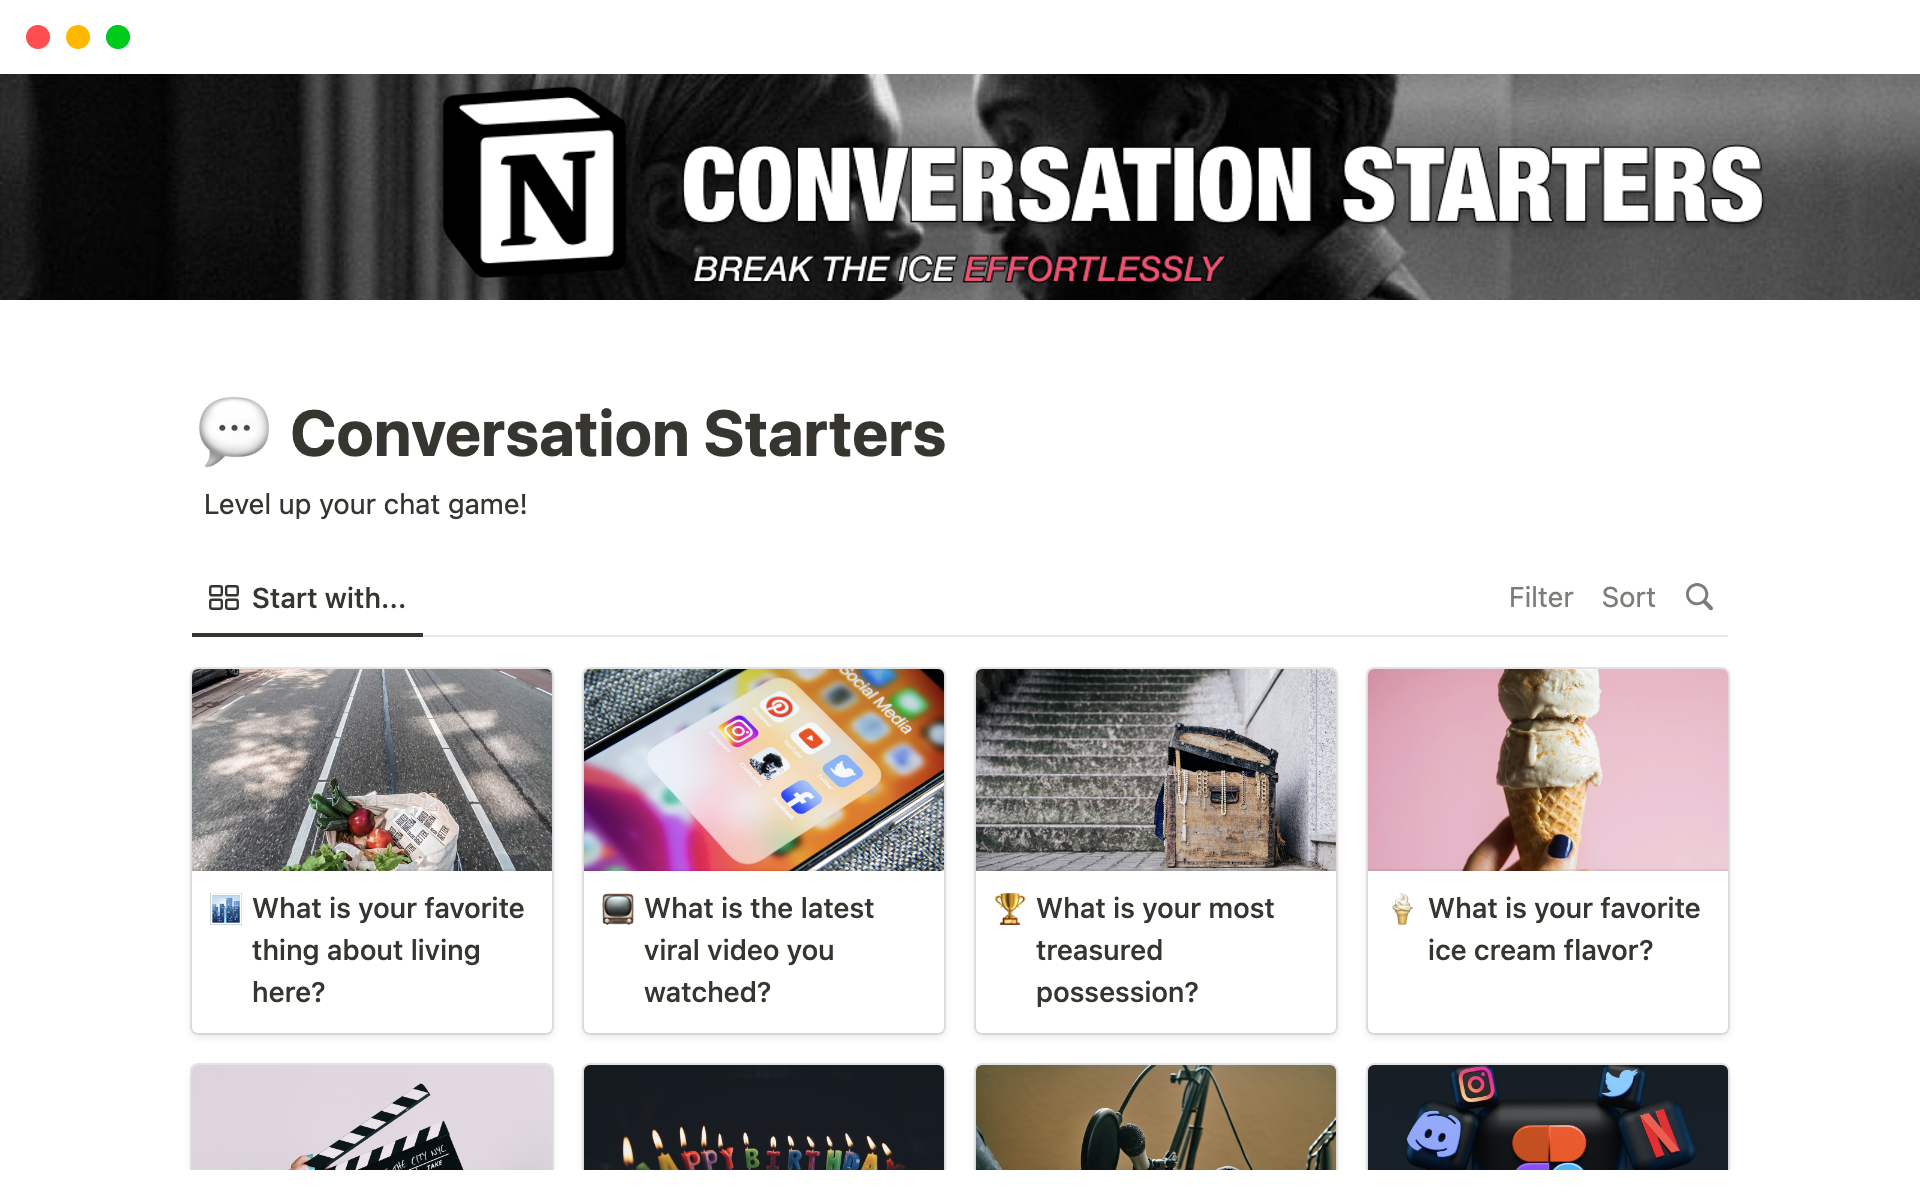 30 conversation starters to break the ice effortlessly with